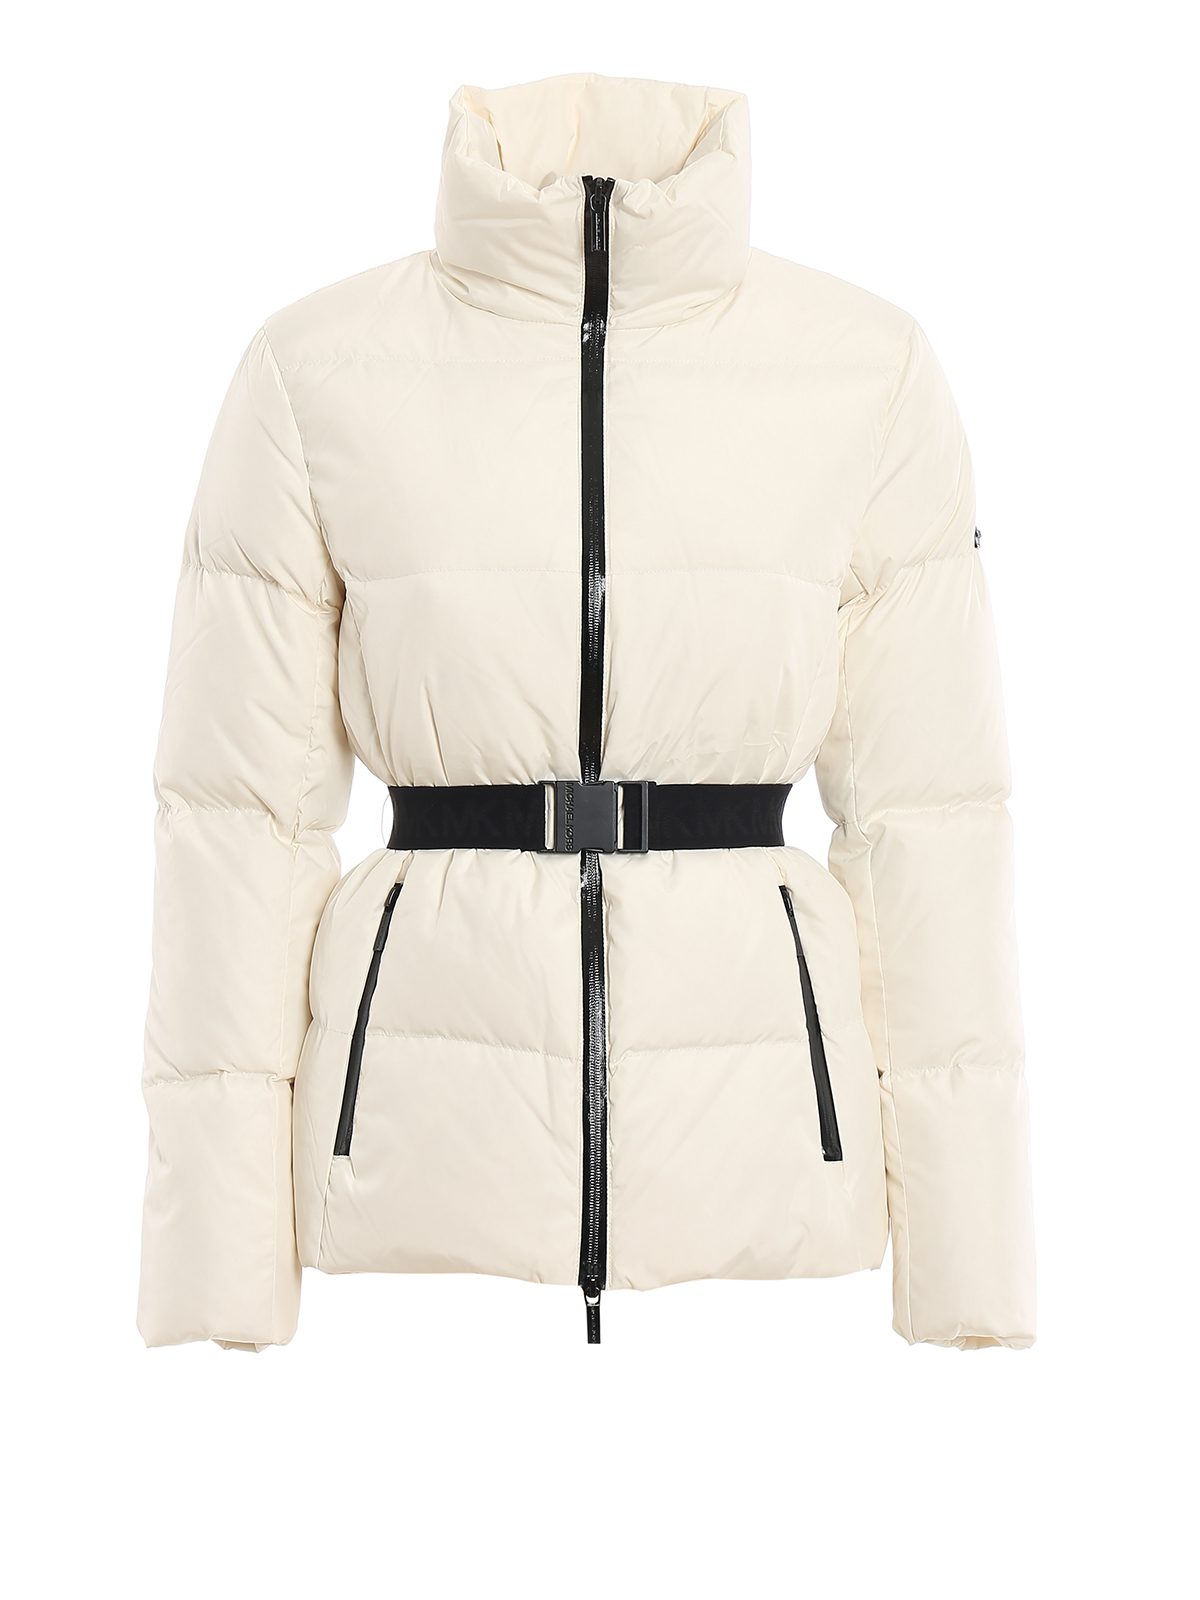 MICHAEL KORS BELTED QUILTED PUFFER JACKET